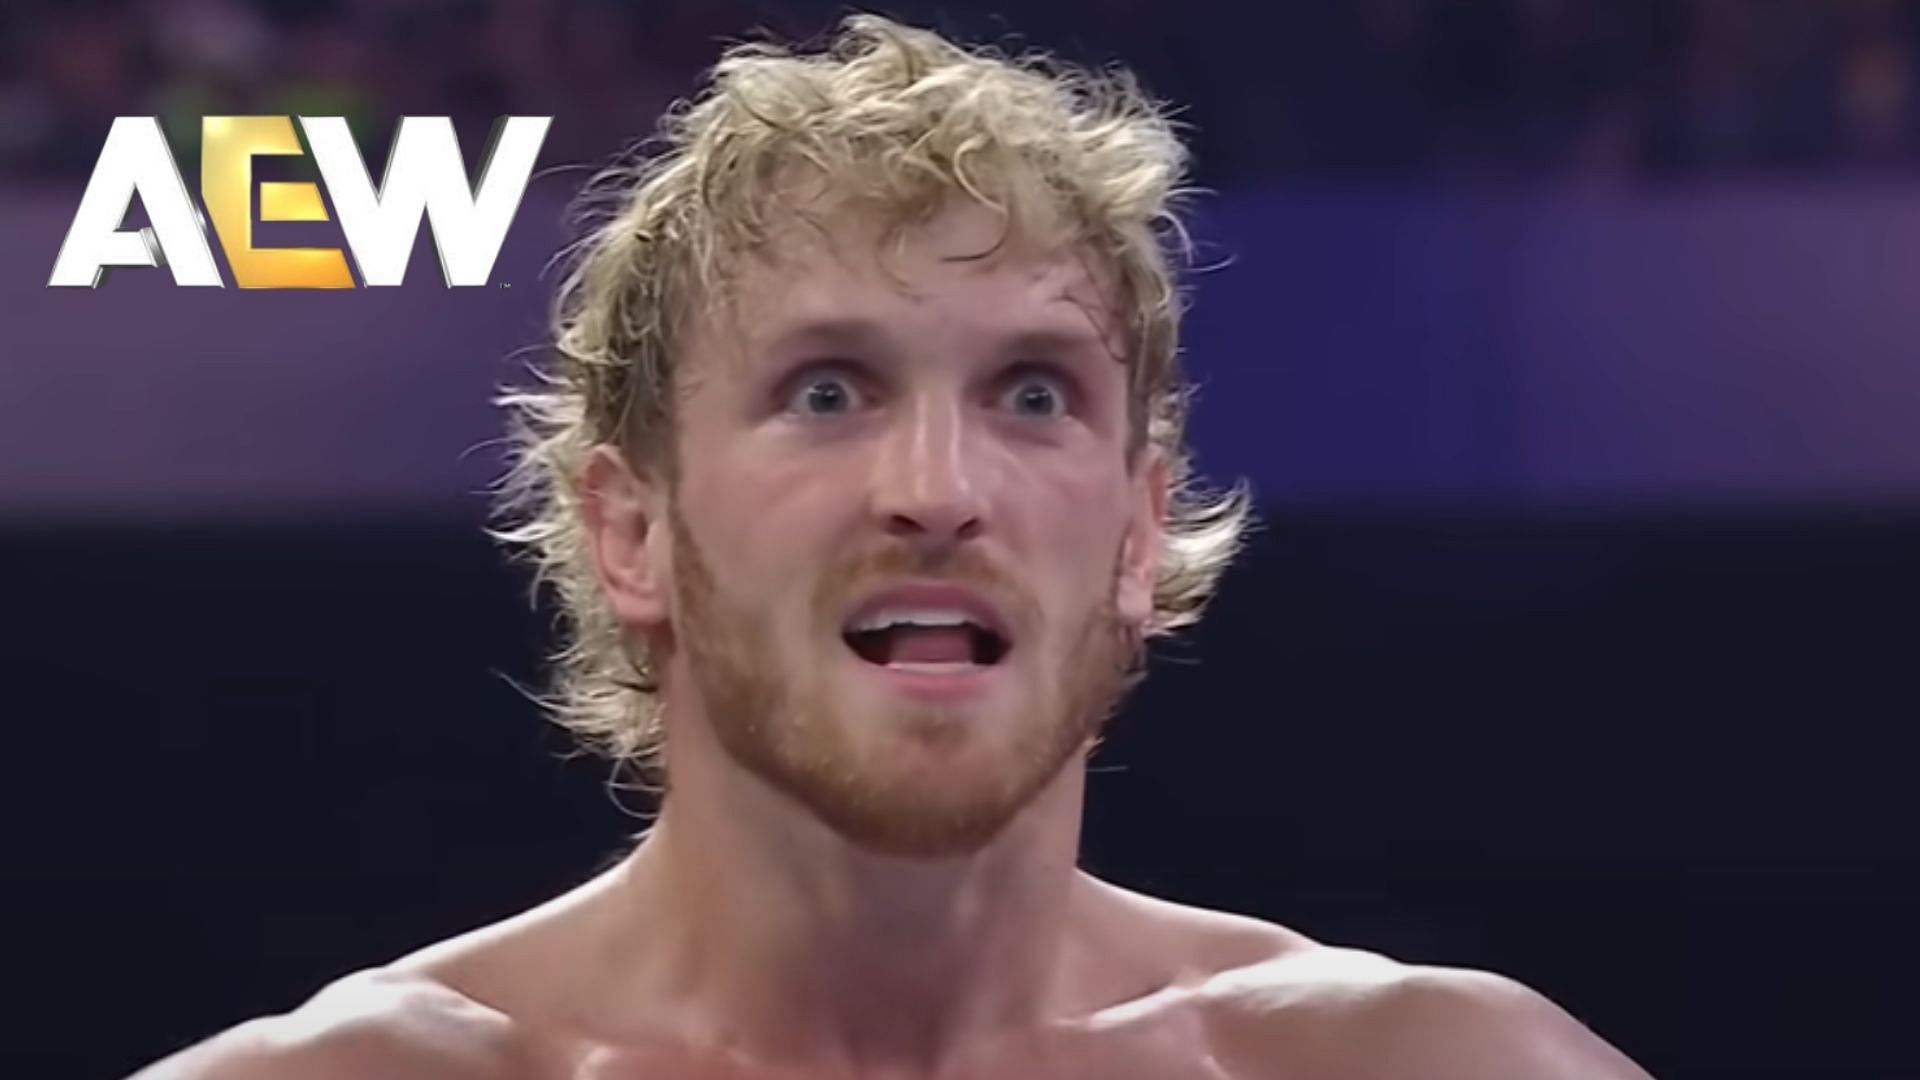 Logan Paul is the reigning WWE US Champion [Image Credits: WWE